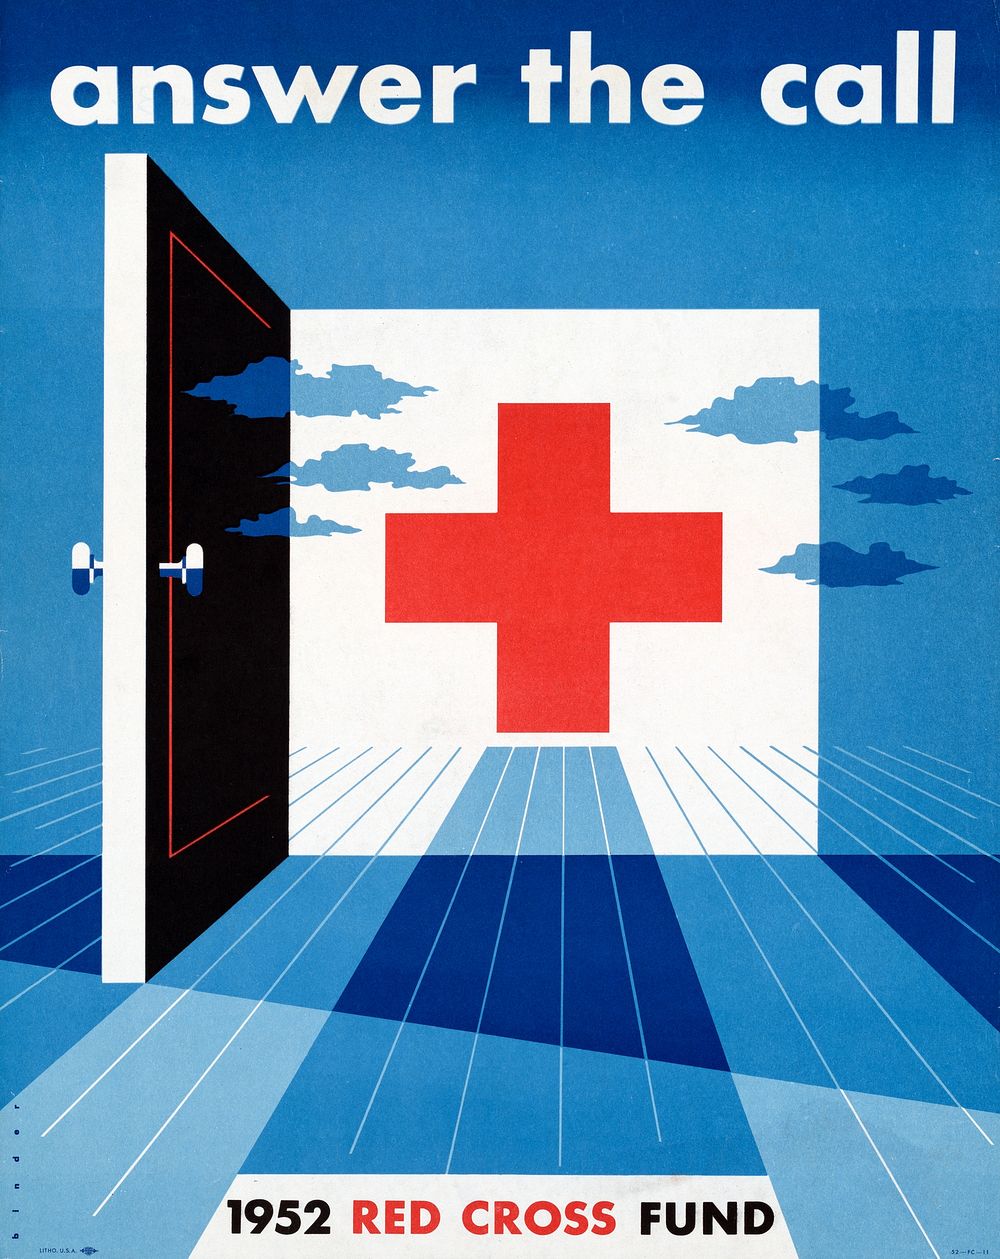 Answer the call: Red Cross Fund (1952) vintage health poster by Joseph Binder. Original public domain image from the Library…